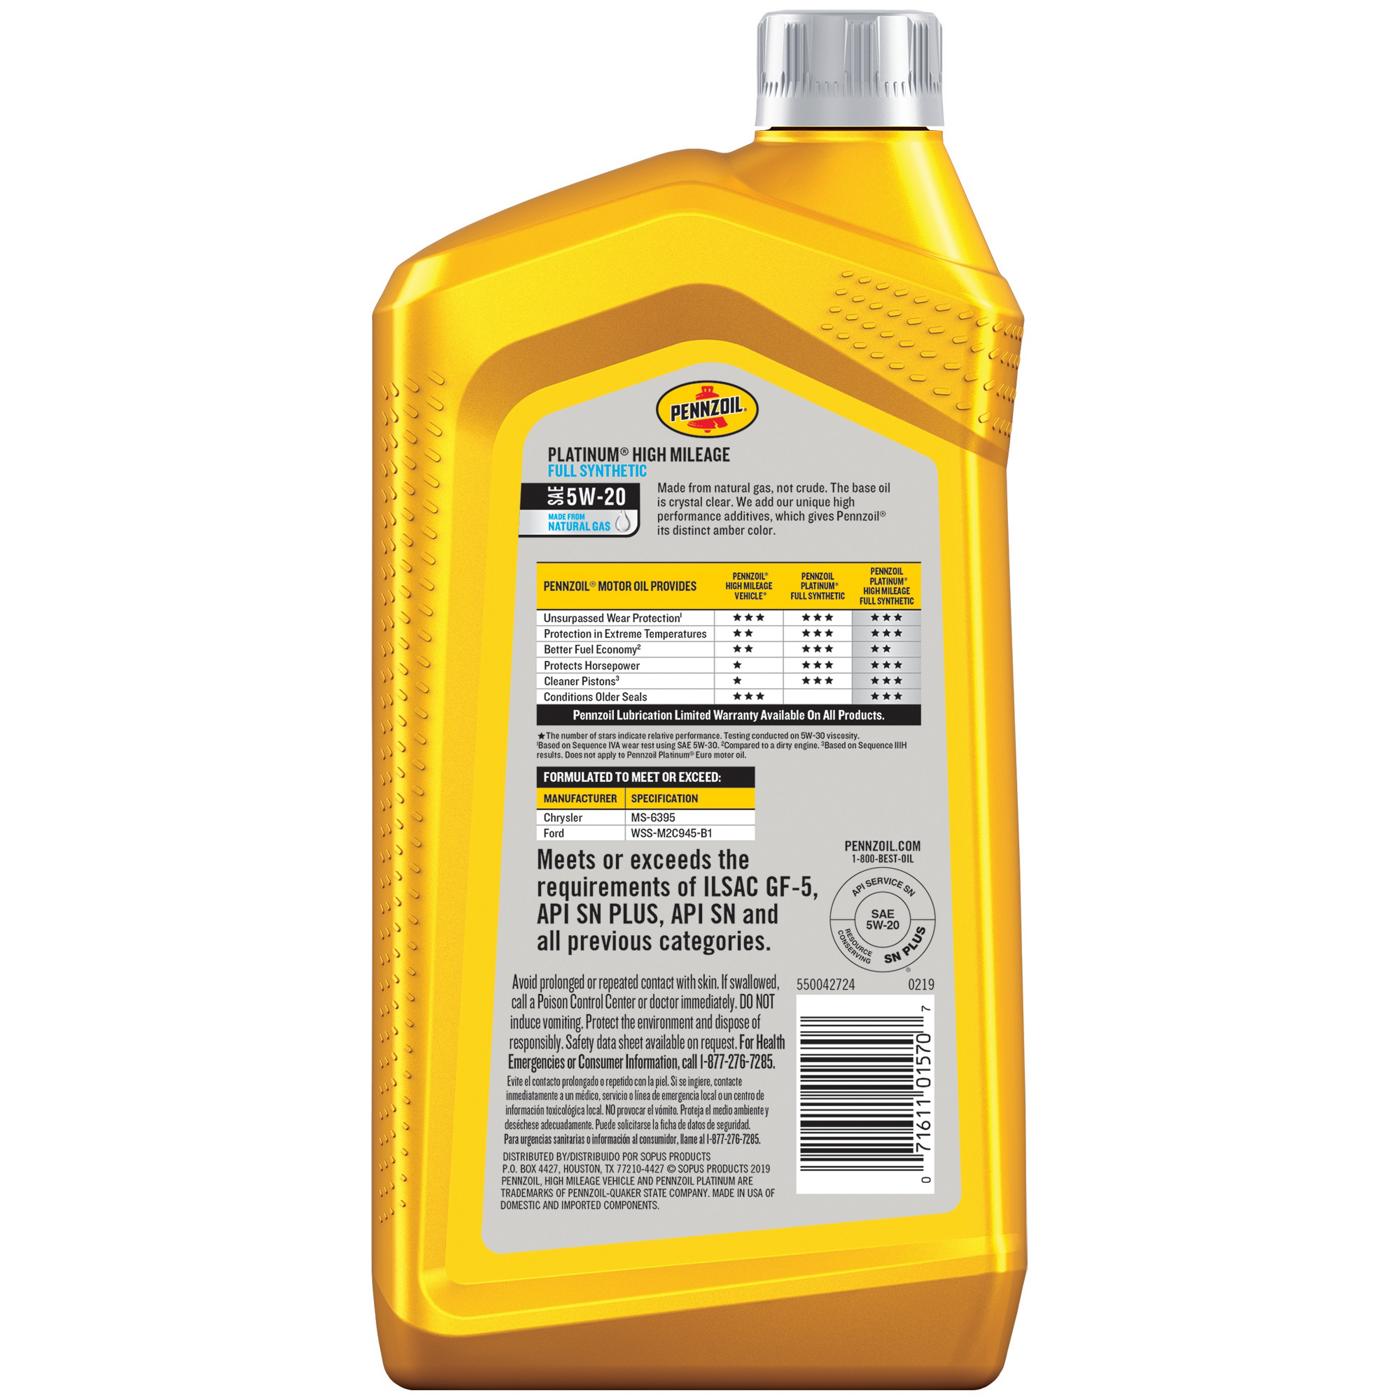 Pennzoil 5W-20 Platinum High Mileage Full Synthetic Motor Oil; image 2 of 2